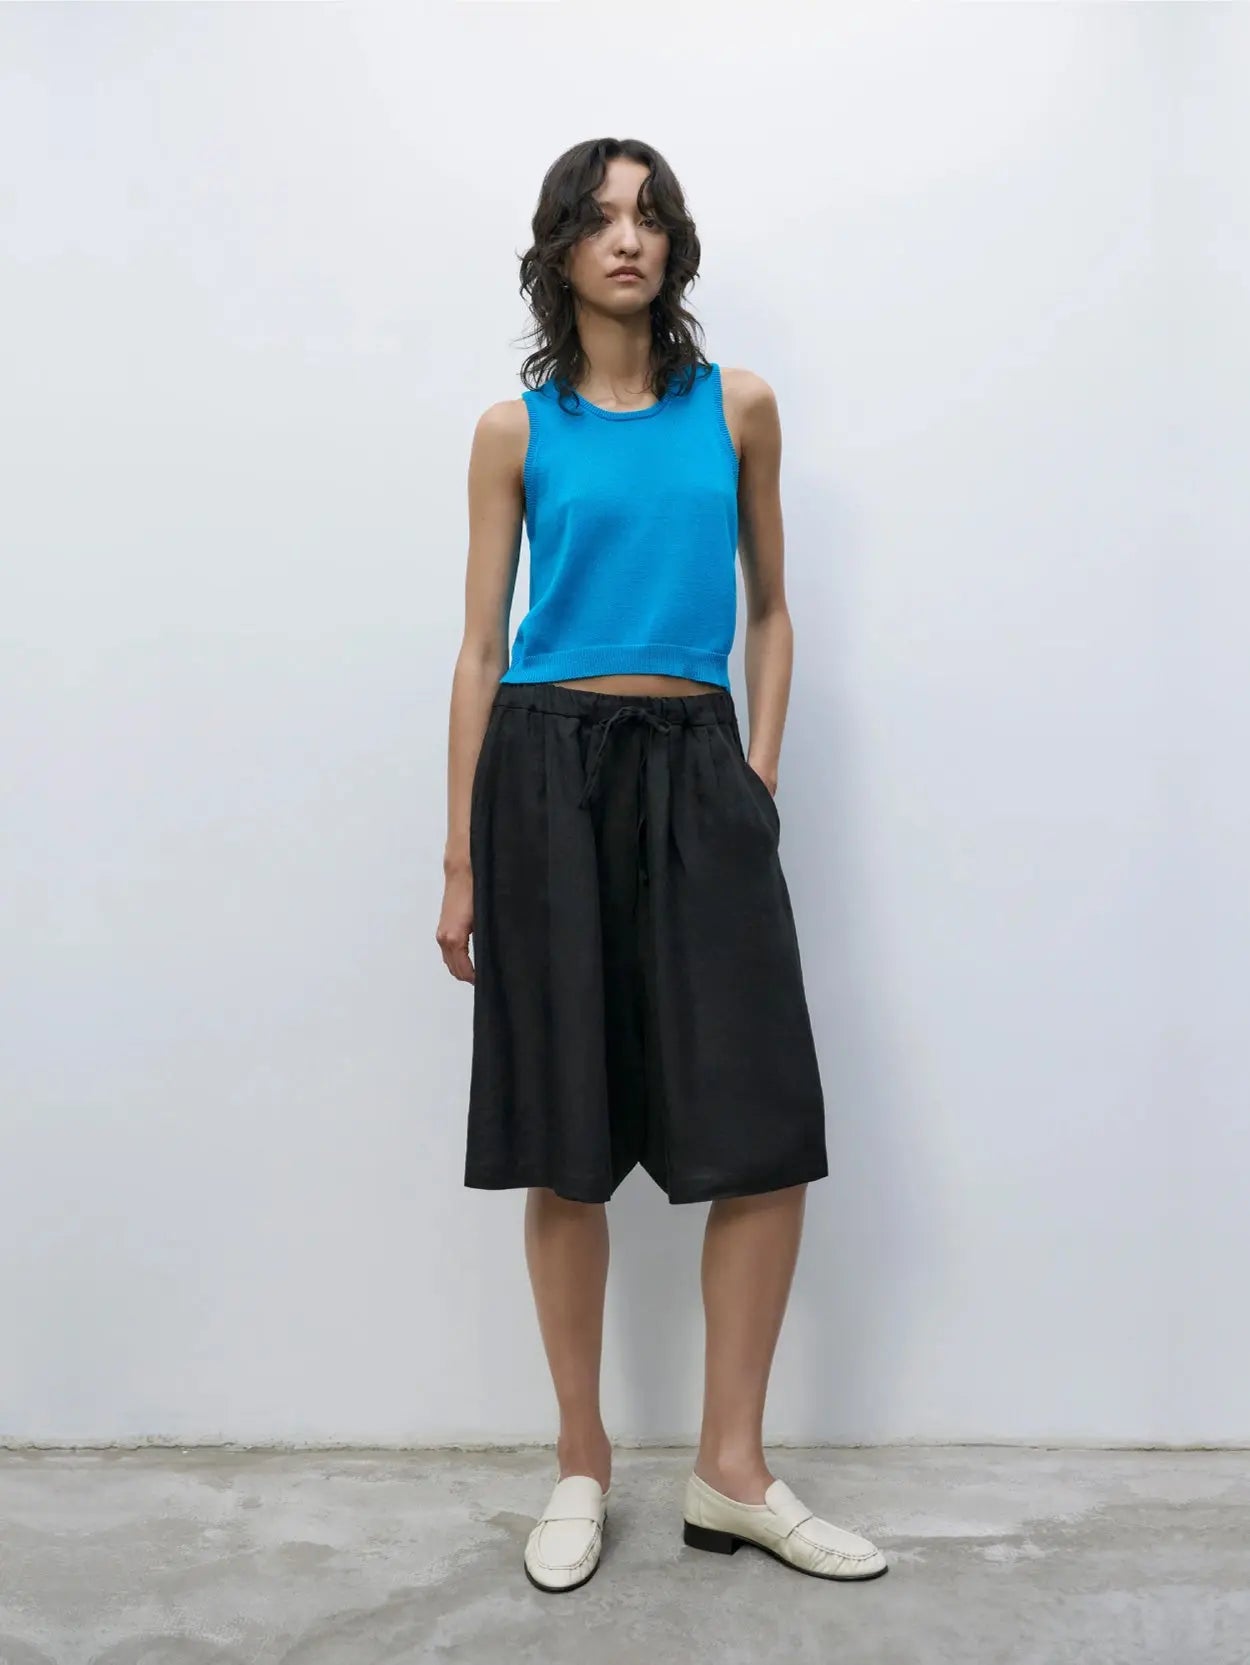 A pair of black, knee-length shorts with an elastic waistband and drawstring, laid flat on a white background. The fabric appears to be lightweight and comfortable, suitable for casual or athletic wear—perfect for browsing through the vibrant streets of Barcelona or grabbing gear from bassalstore. The Linen Maxi Bermuda Black by Cordera would be an excellent choice.